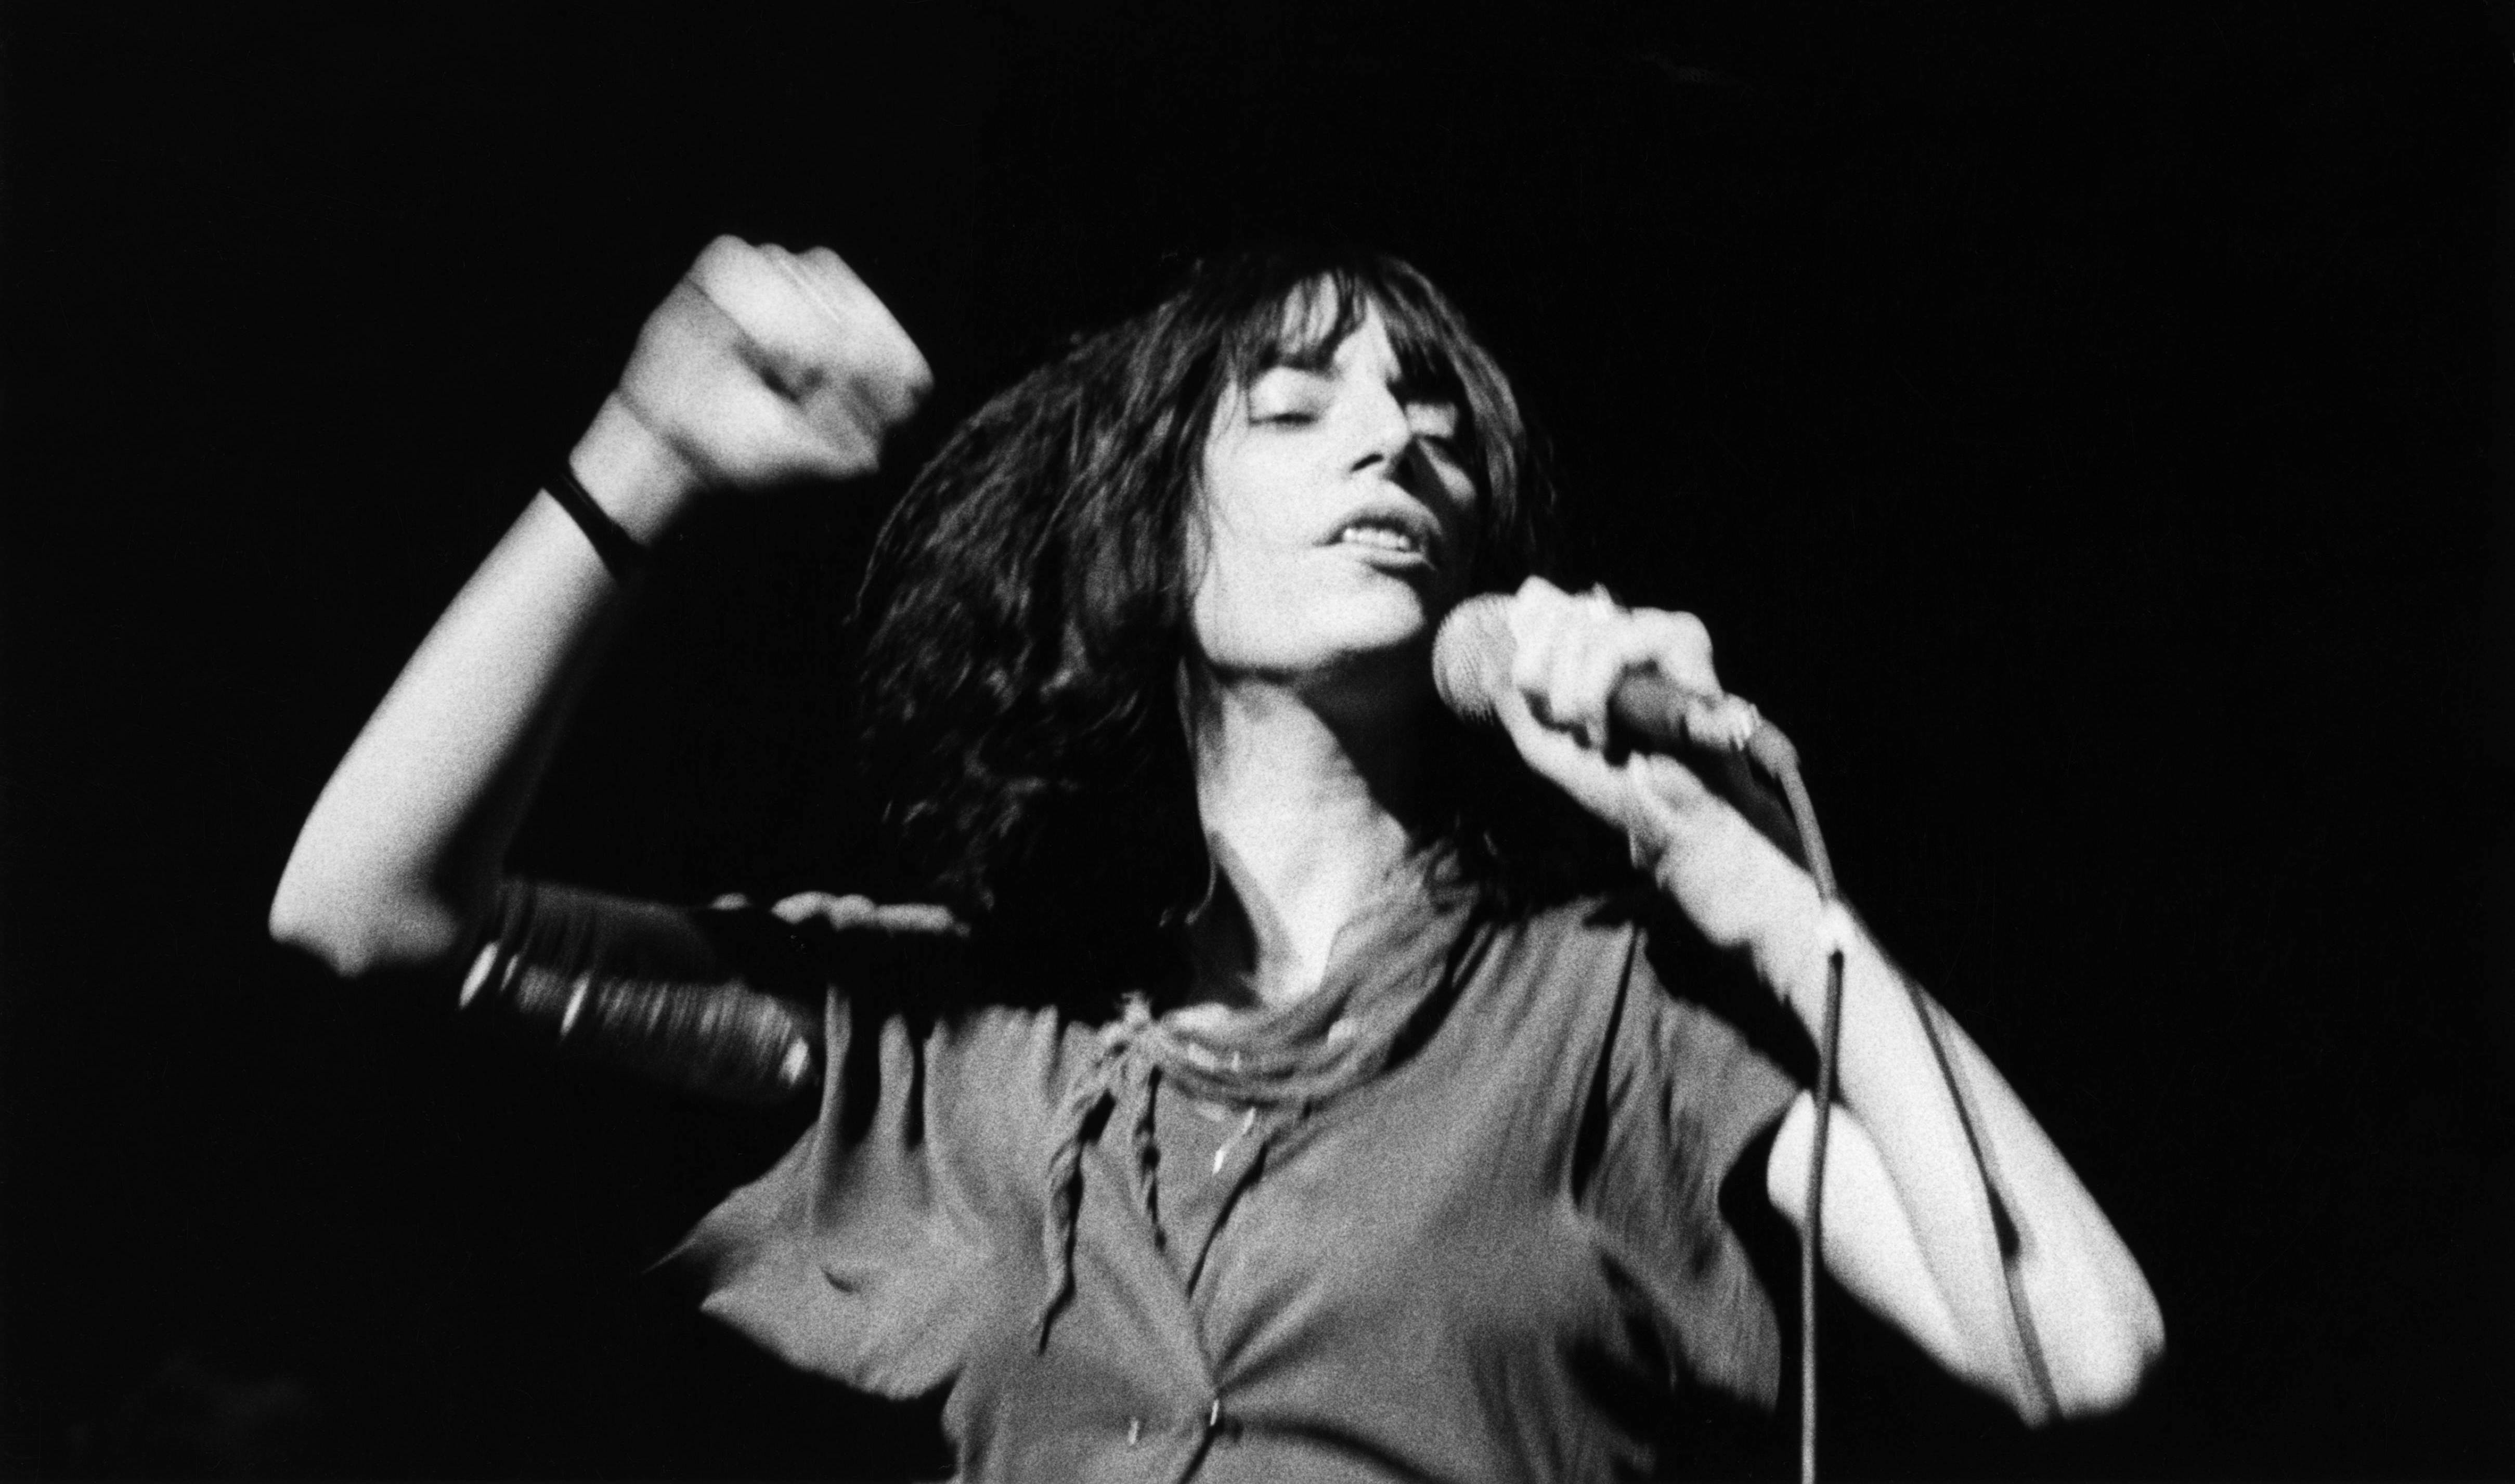 Patti Smith (The Patti Smith Group) 20 Greatest FrontWomen in Rock